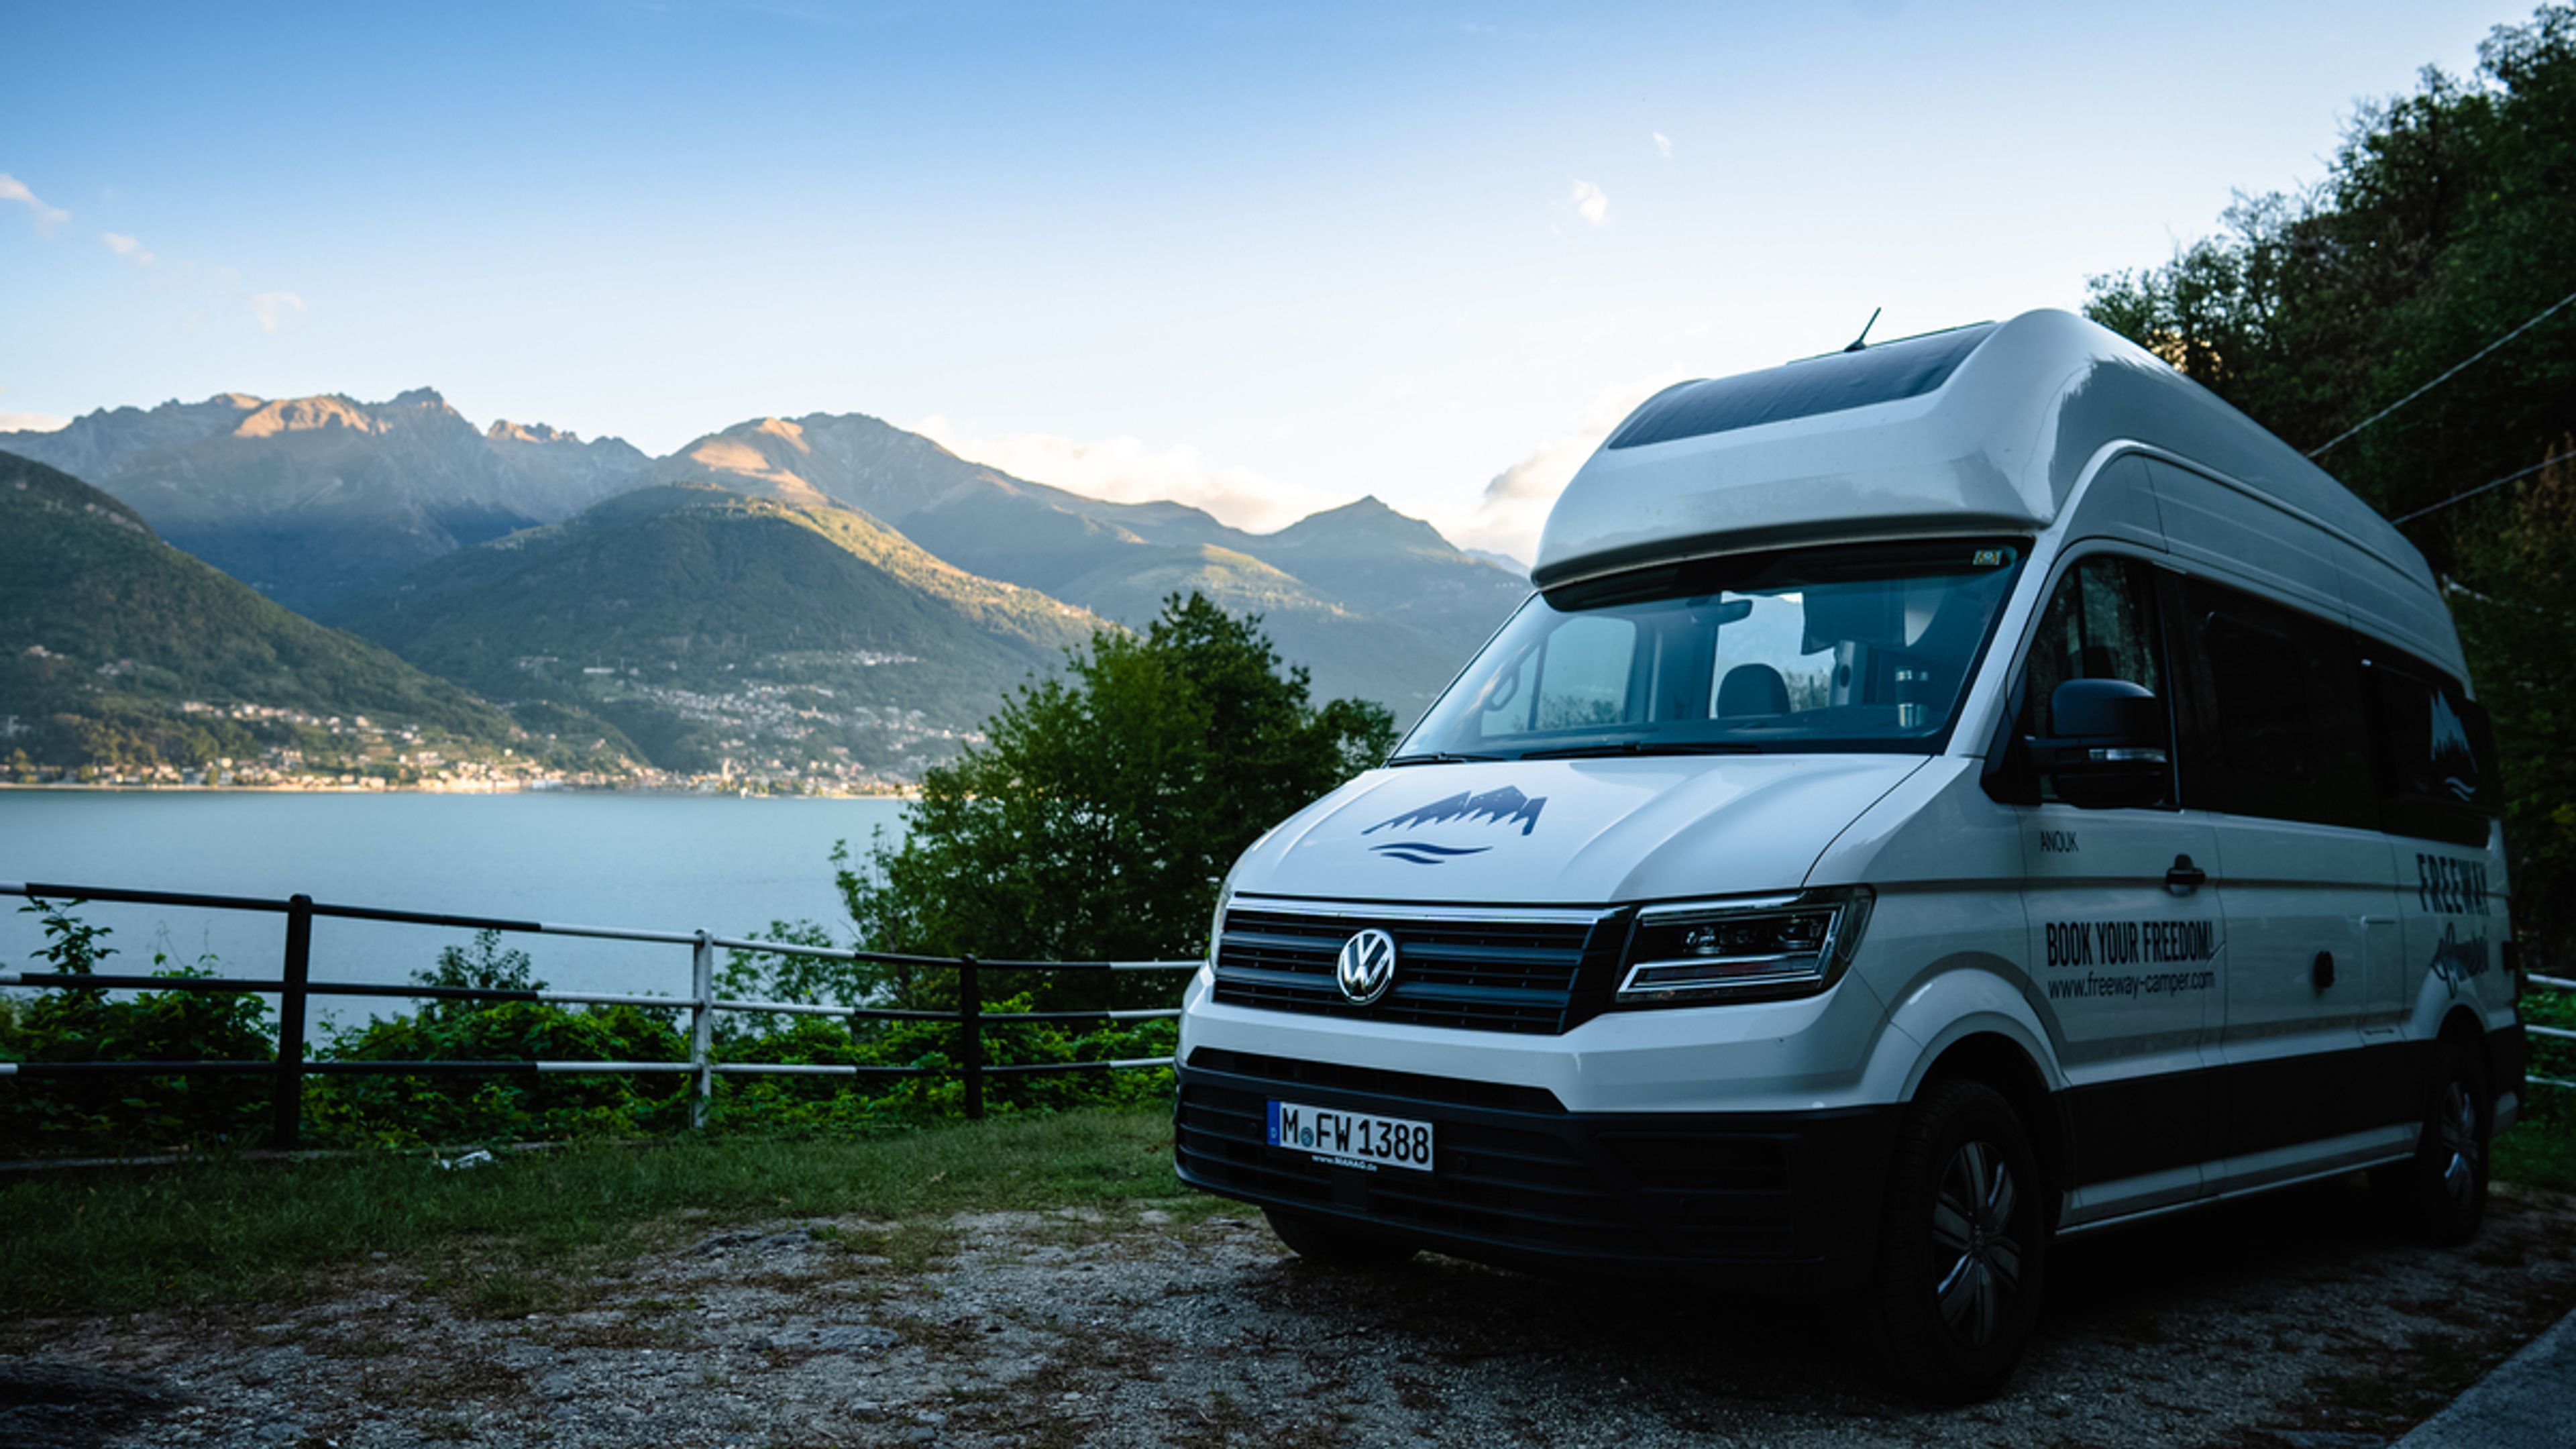 Camping in the Dolomites: 3 weeks with a camper van